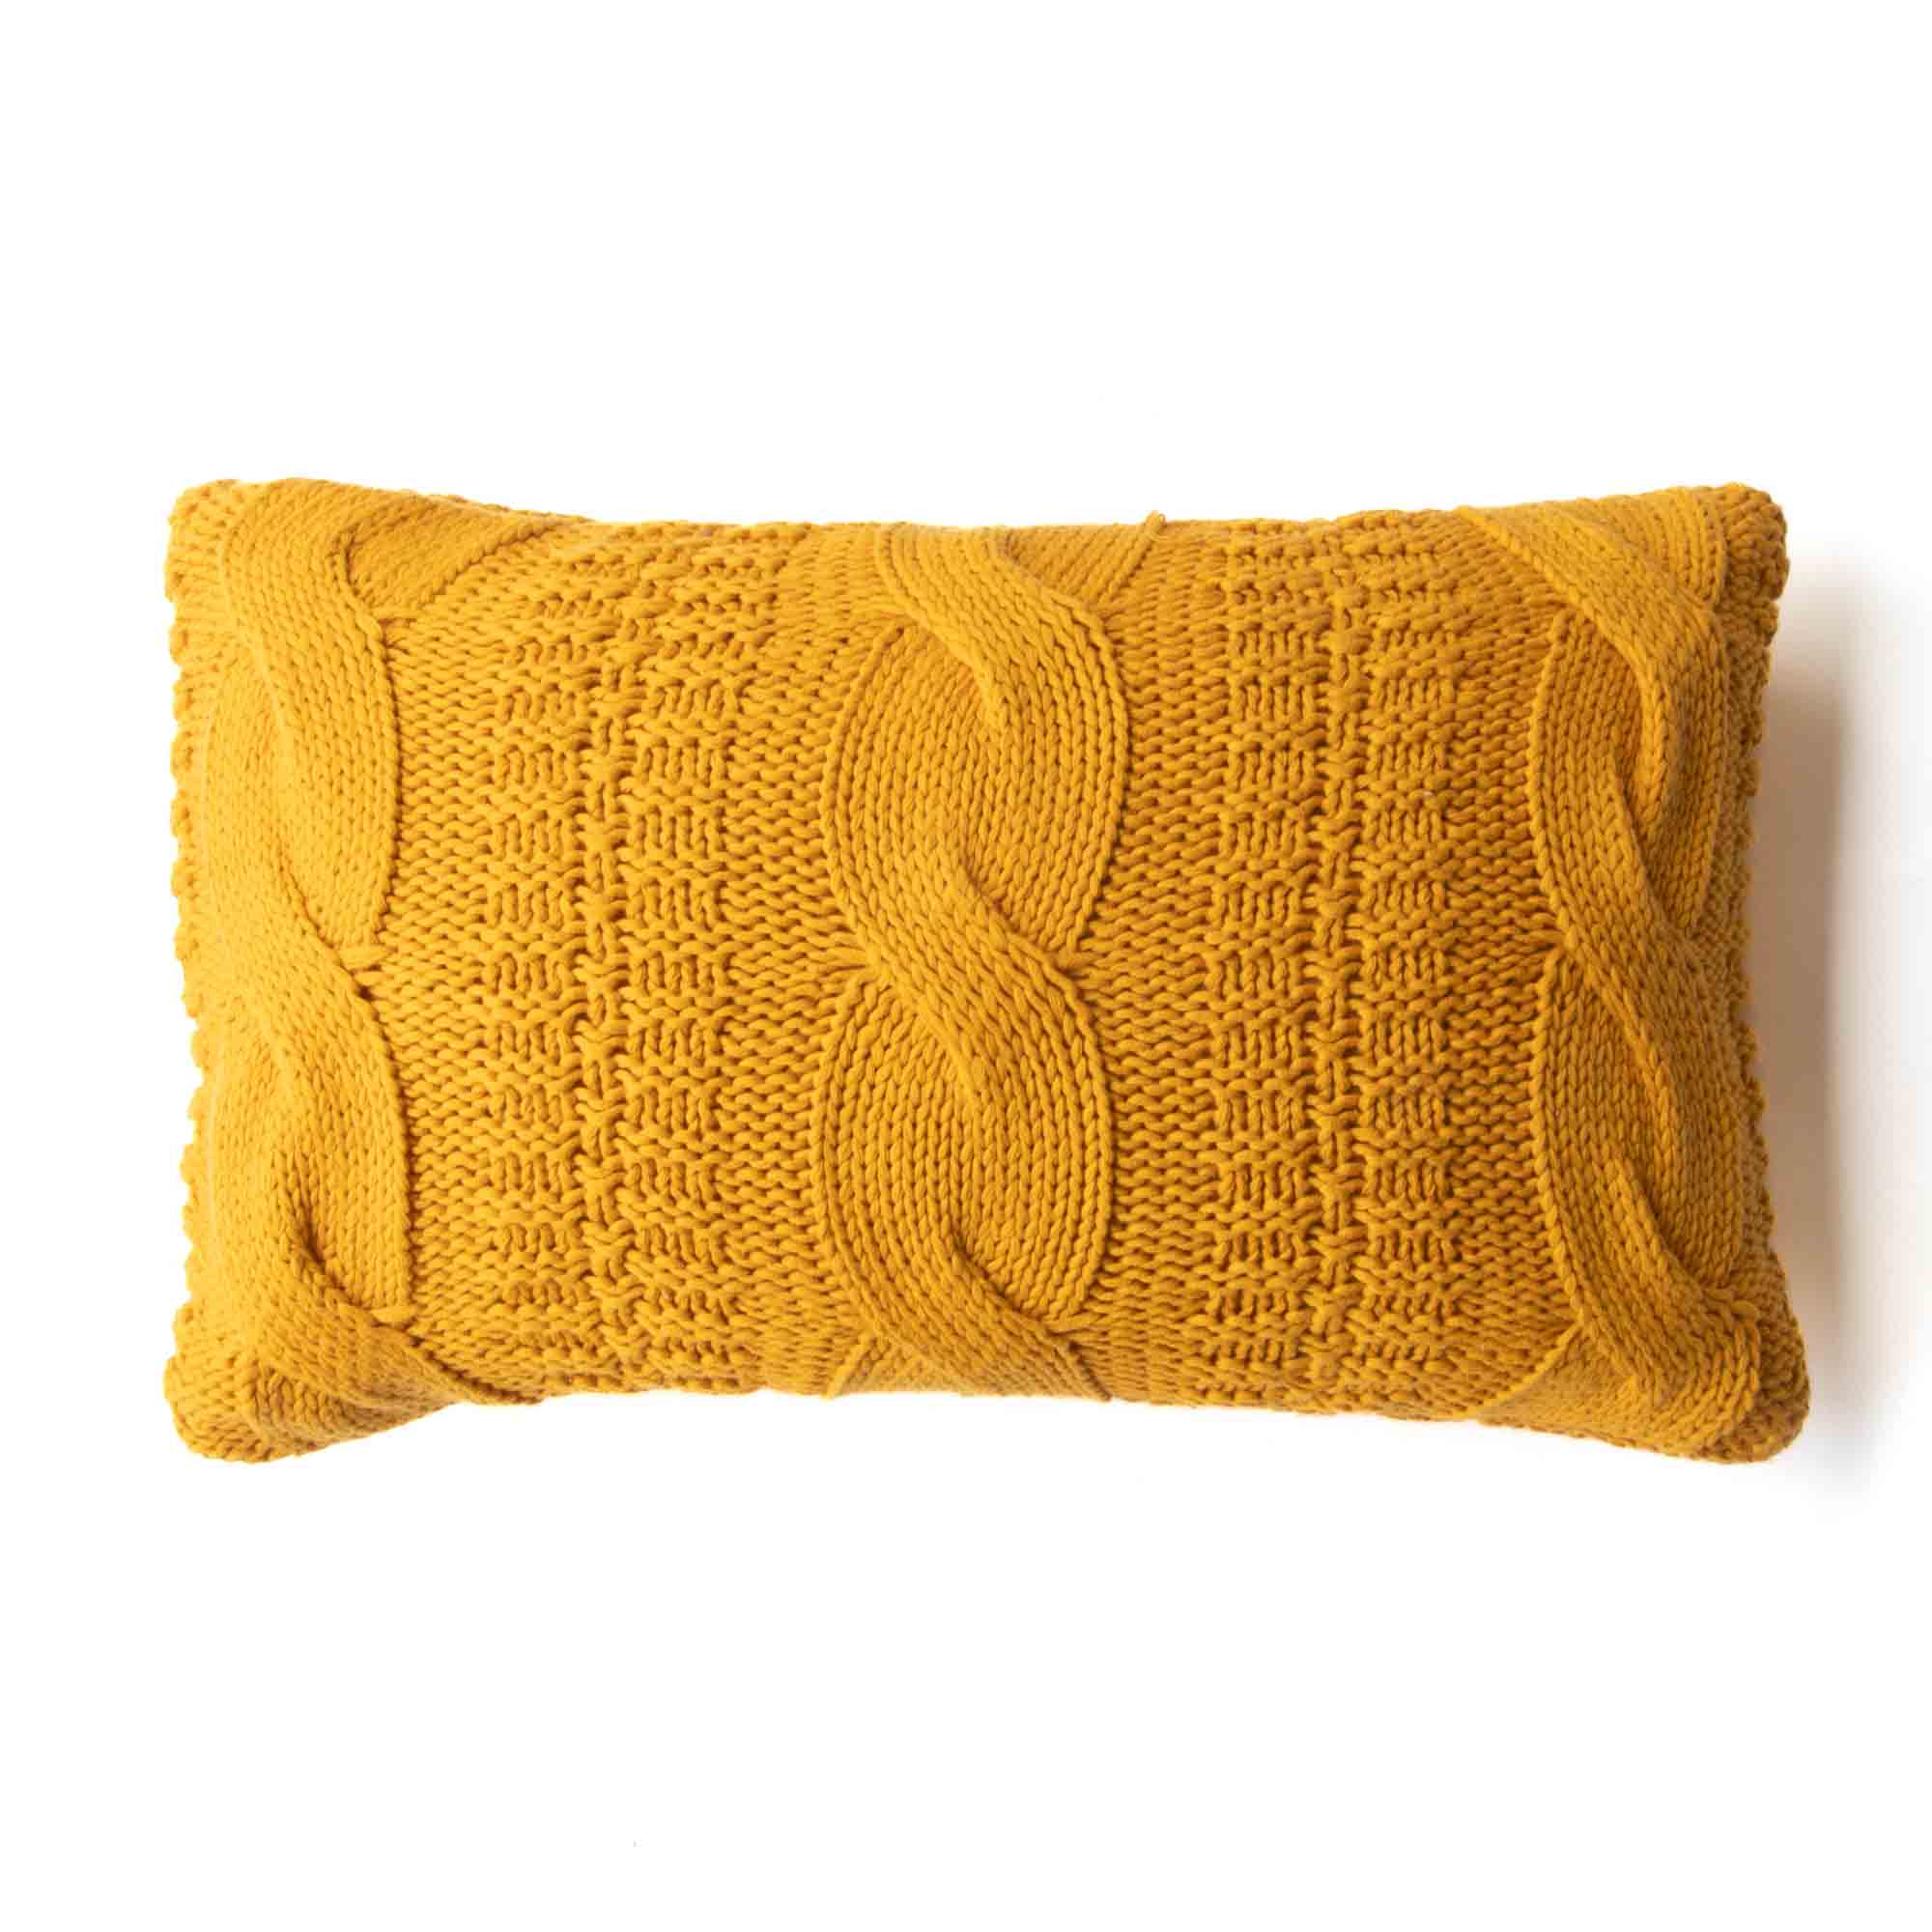 The Bobble Knit Cushion Cover